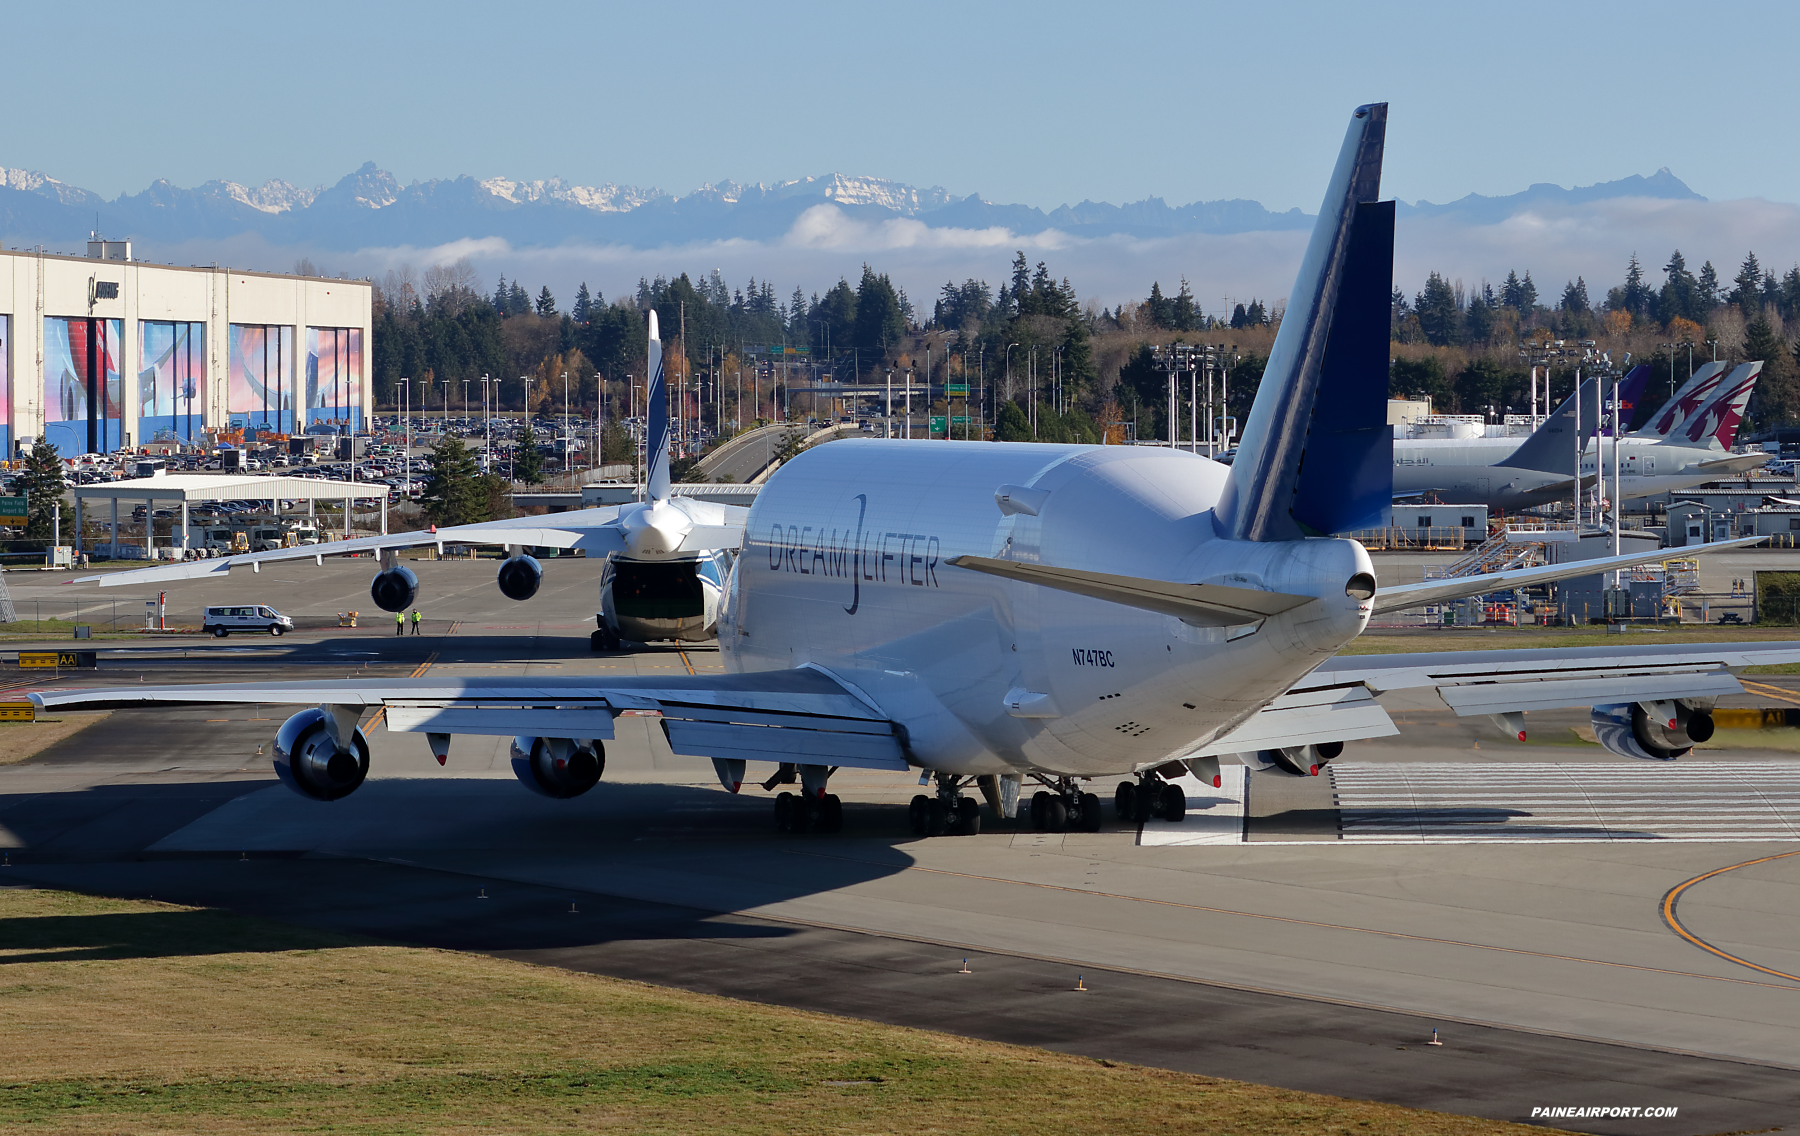 LCF N747BC at Paine Field